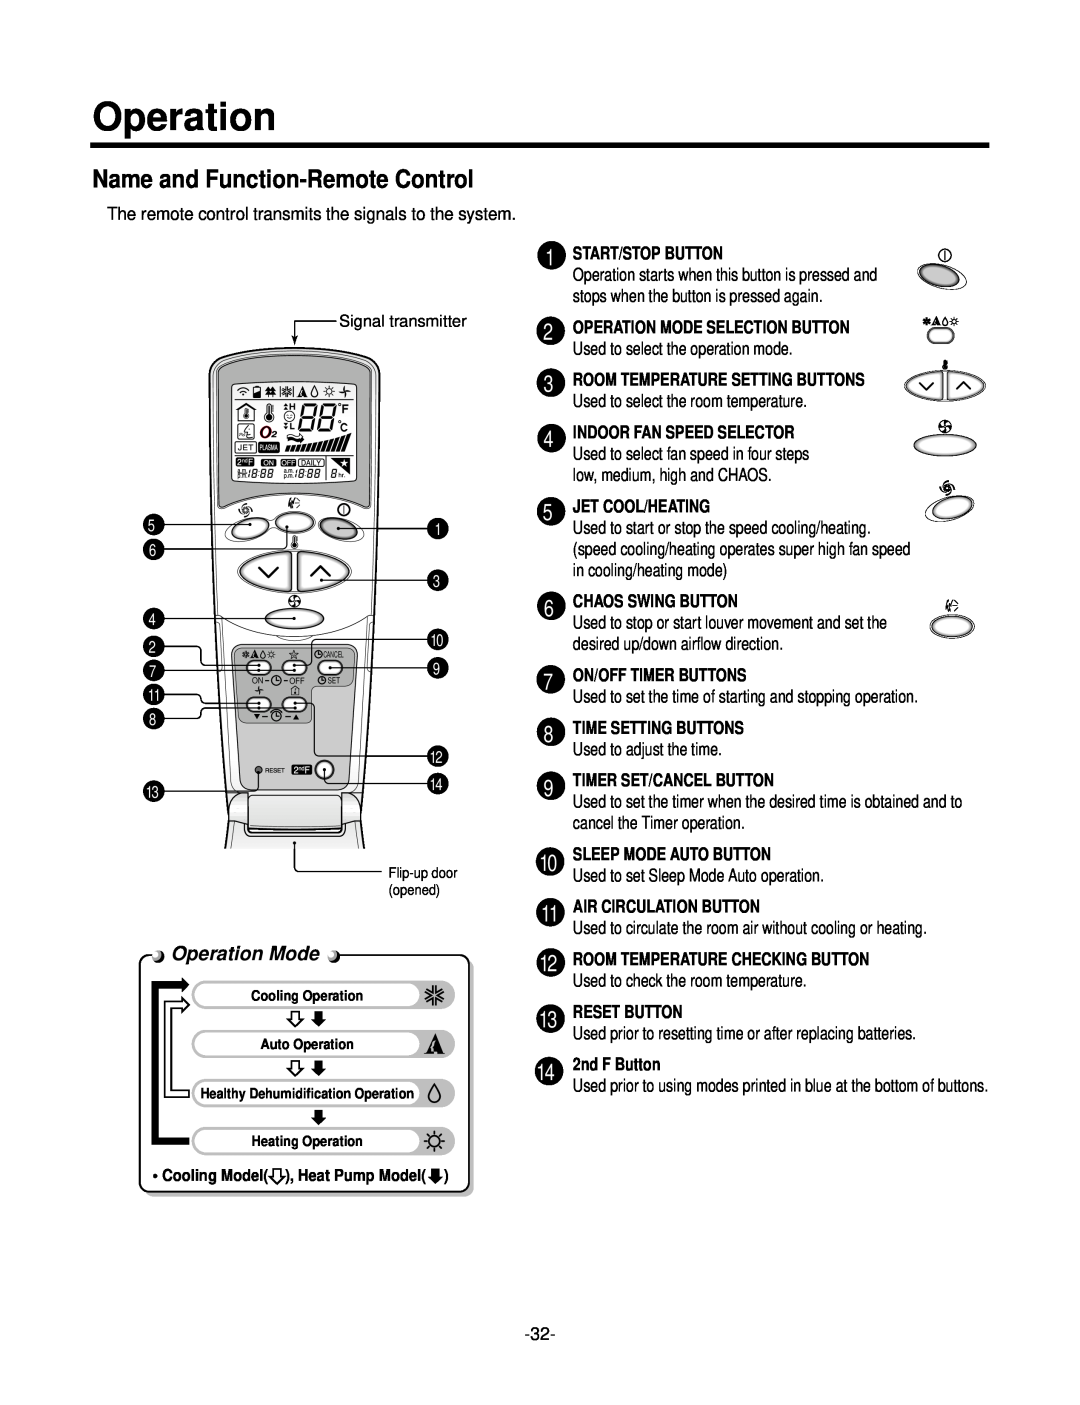 LG Electronics LSC183VMA service manual Name and Function-Remote Control, Operation Mode, Heating Operation 